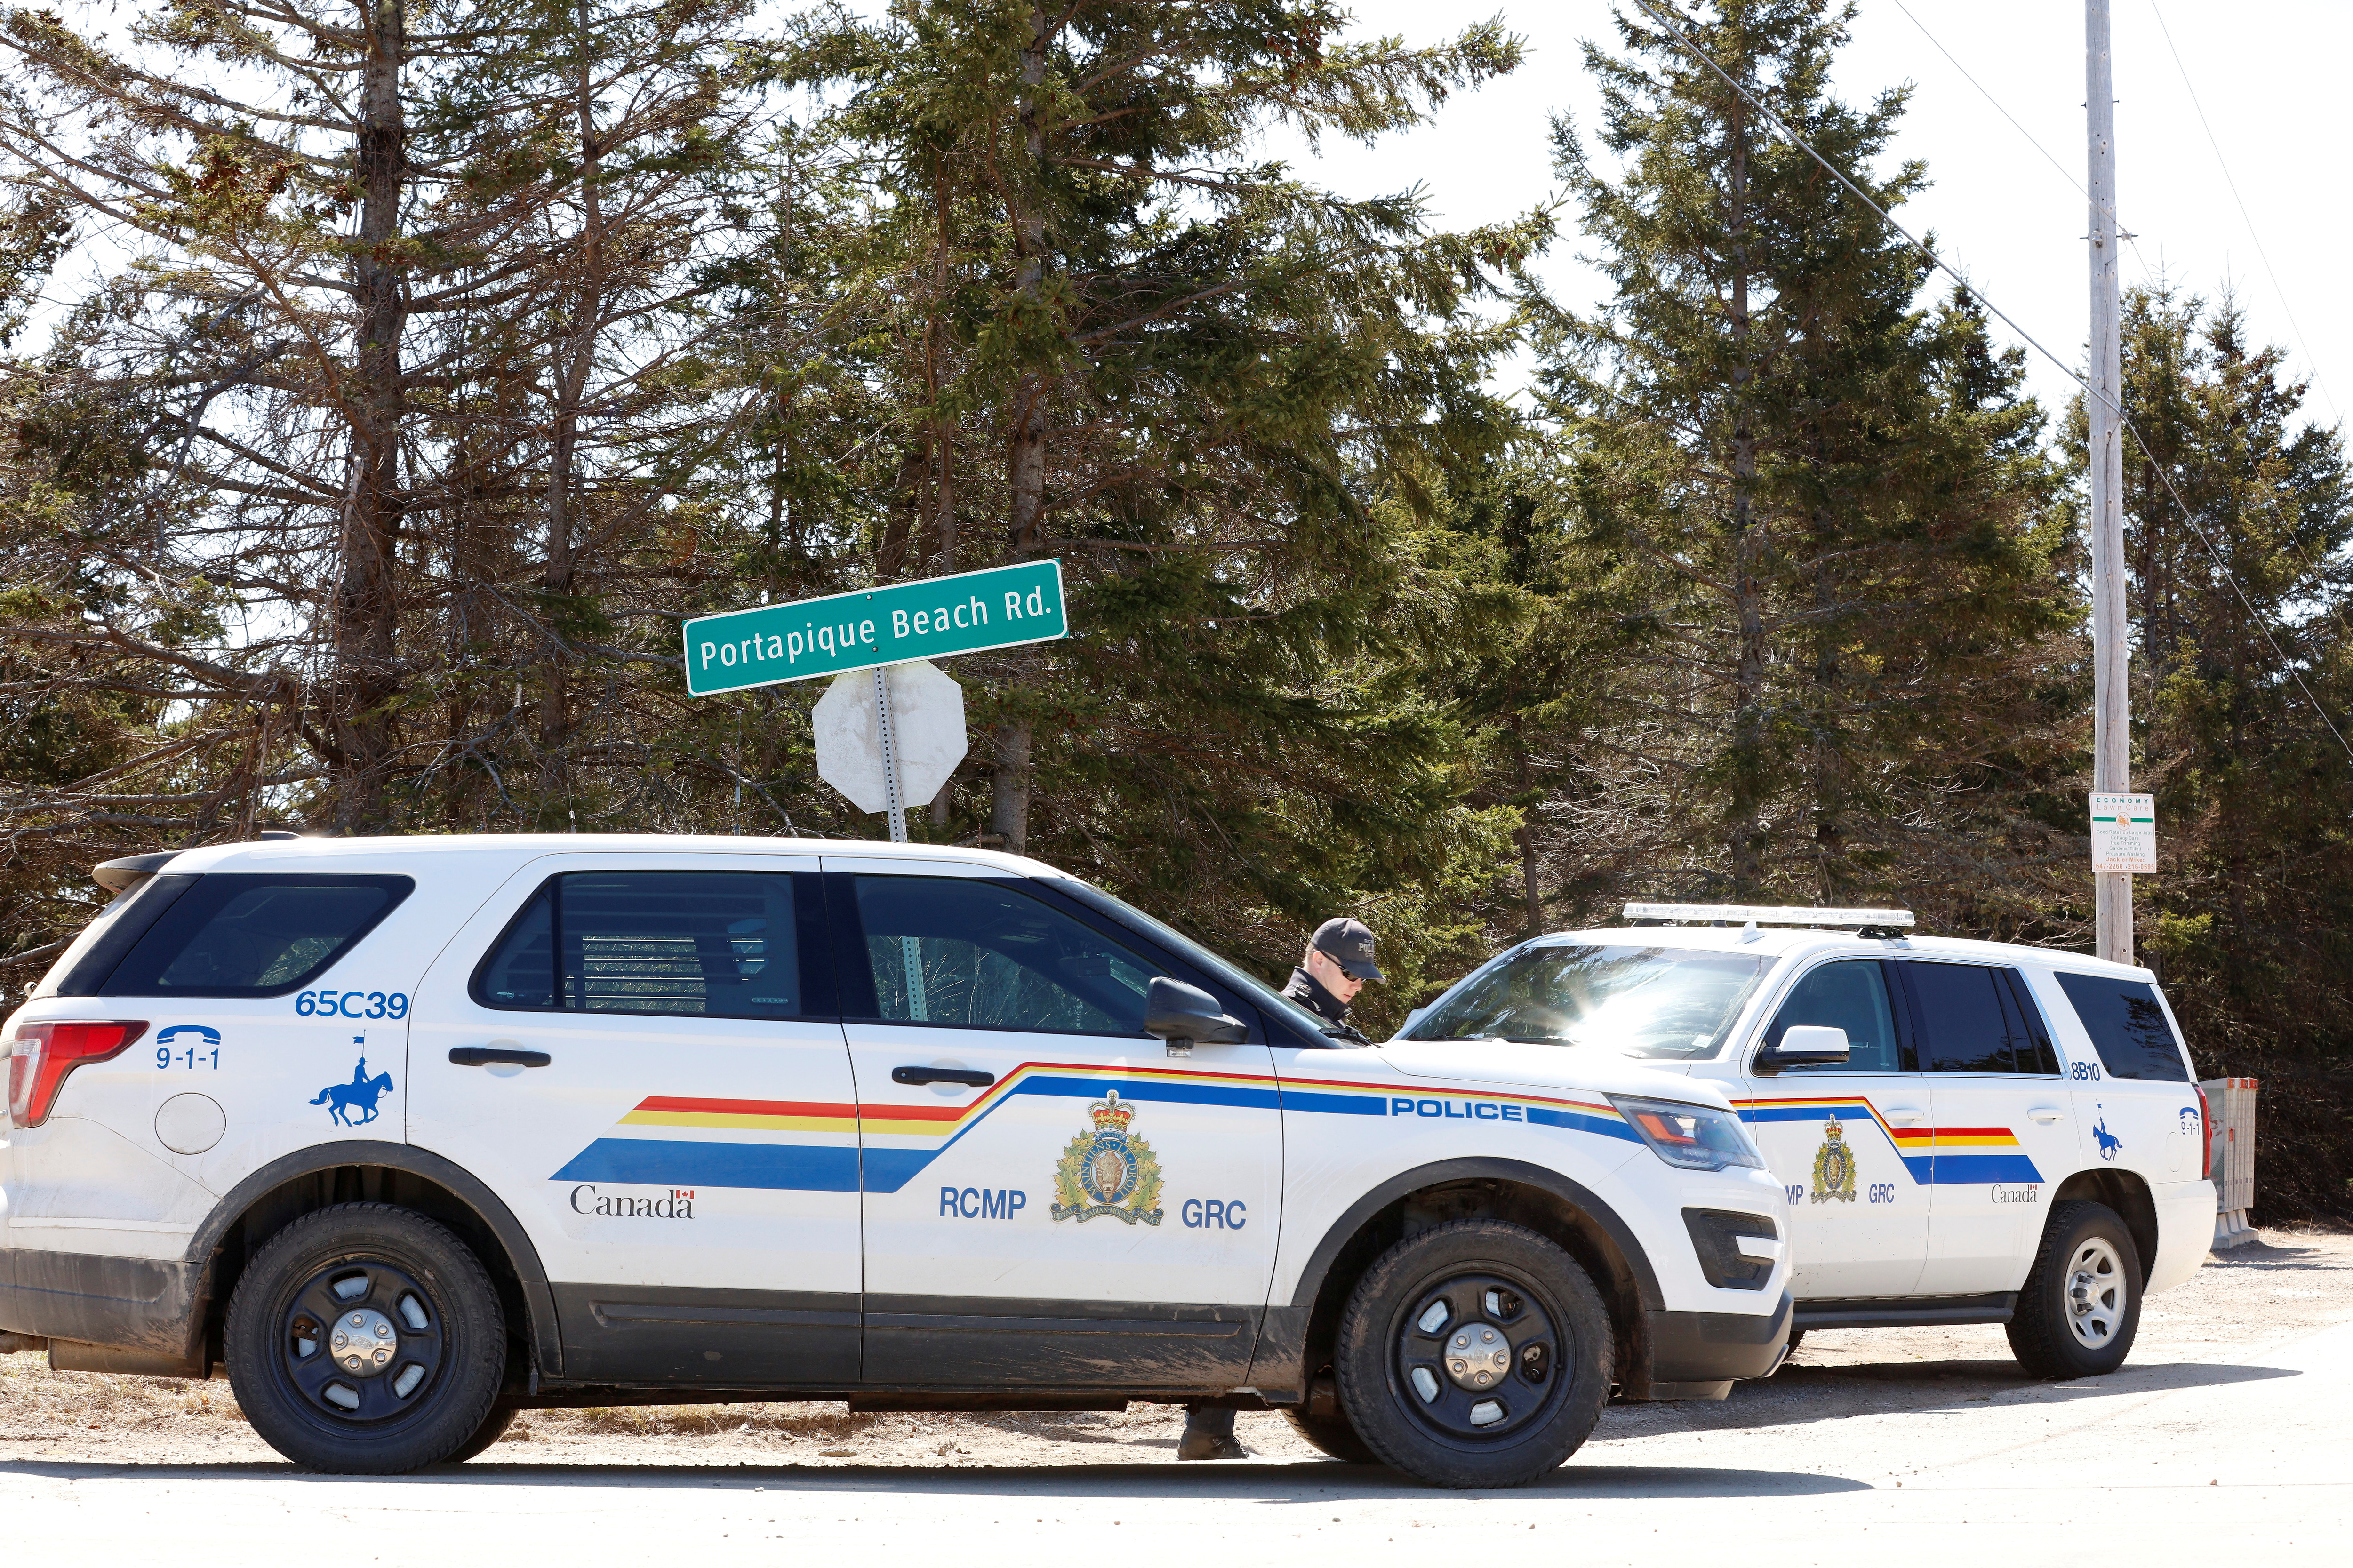 Royal Canadian Mounted Police (RCMP) block the entrance to Portapique Beach Road after they finished their search for Gabriel Wortman, who they describe as a shooter of multiple victims, in Portapique, Nova Scotia, Canada April 19, 2020. REUTERS/John Morris/File Photo